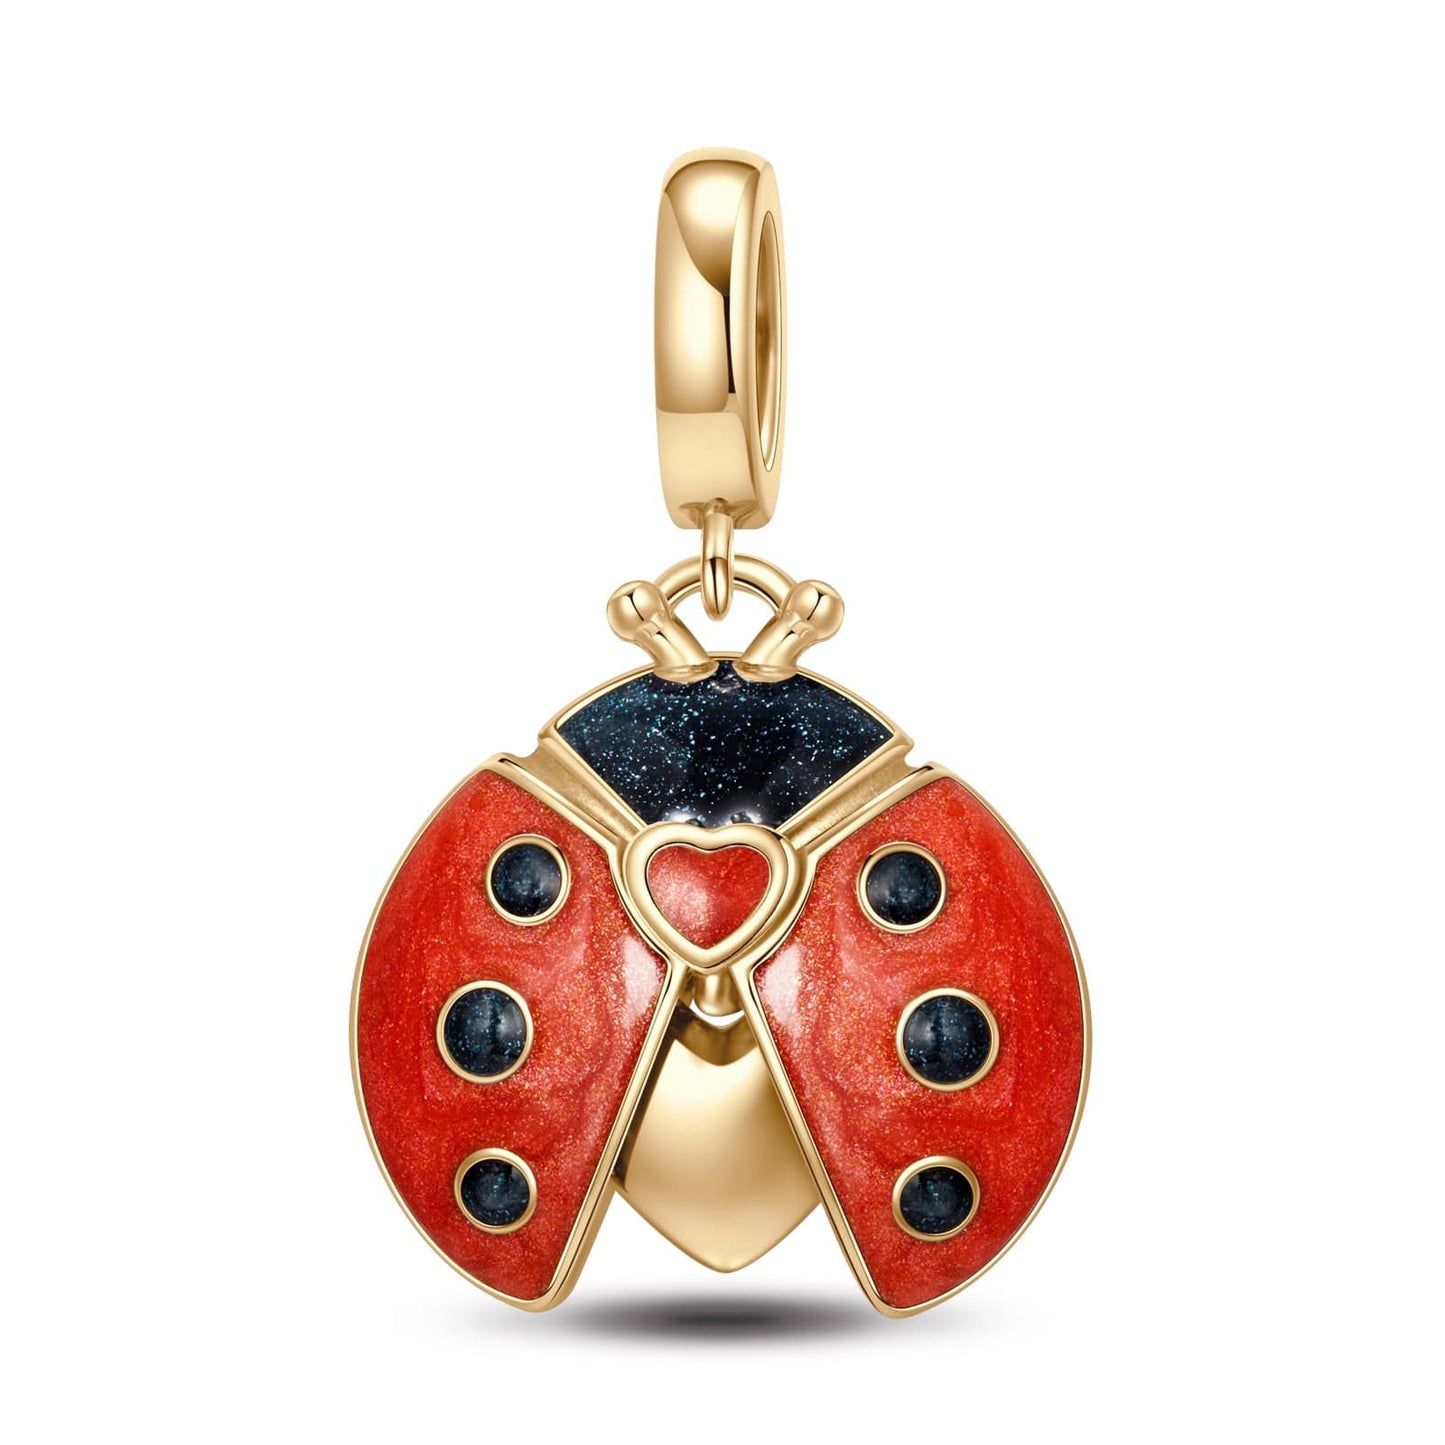 Ladybird Tarnish-resistant Silver Animal Charms With Enamel In 14K Gold Plated